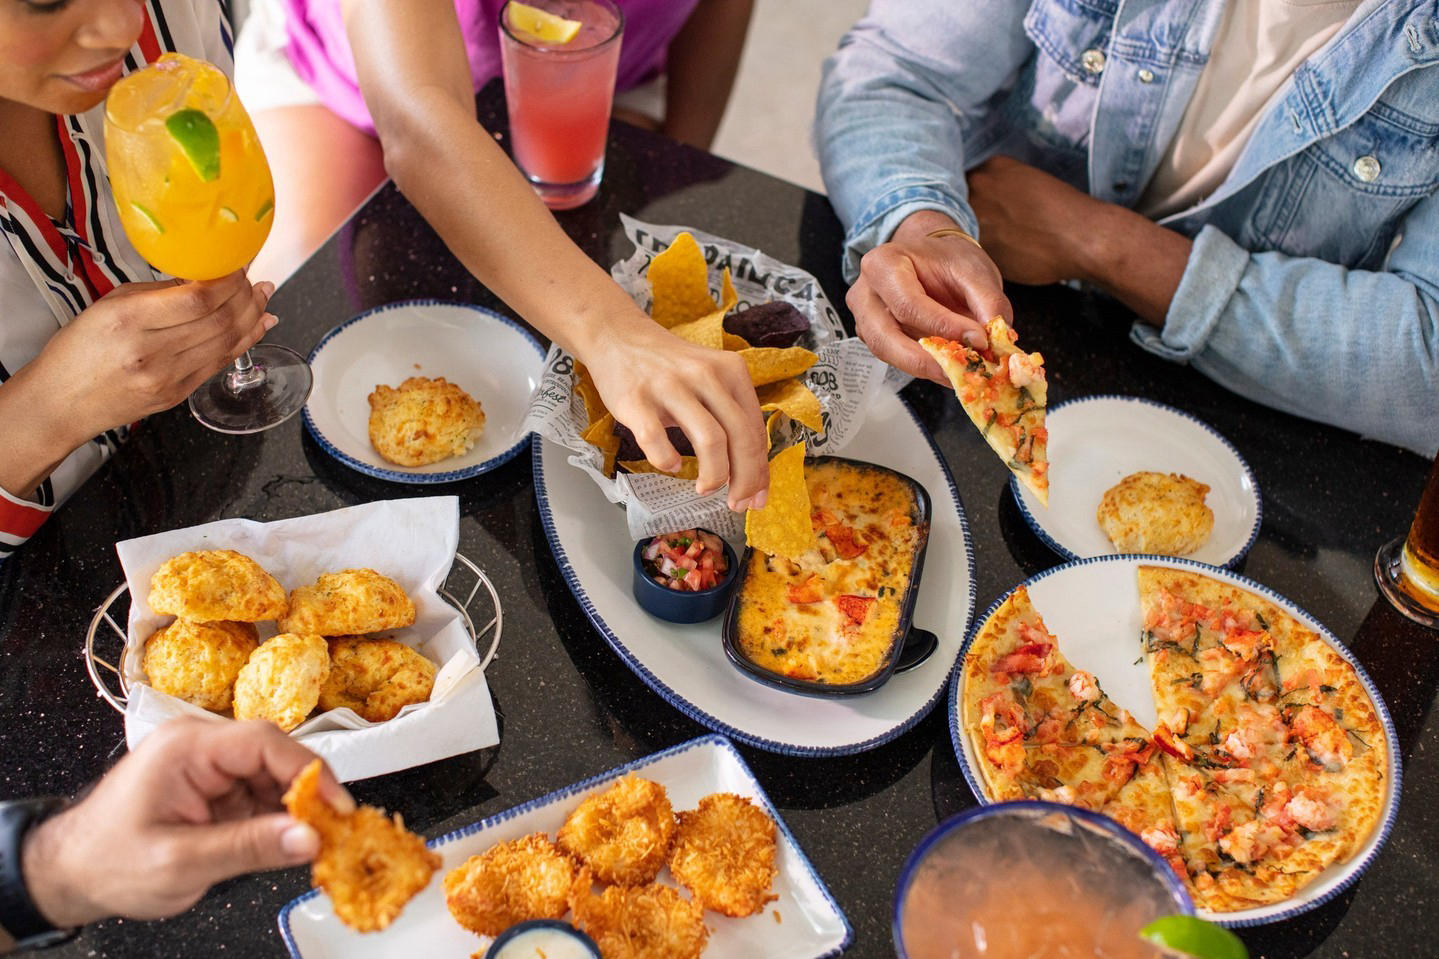 Red Lobster - The struggle is real when choosing which app to sink your claws into first